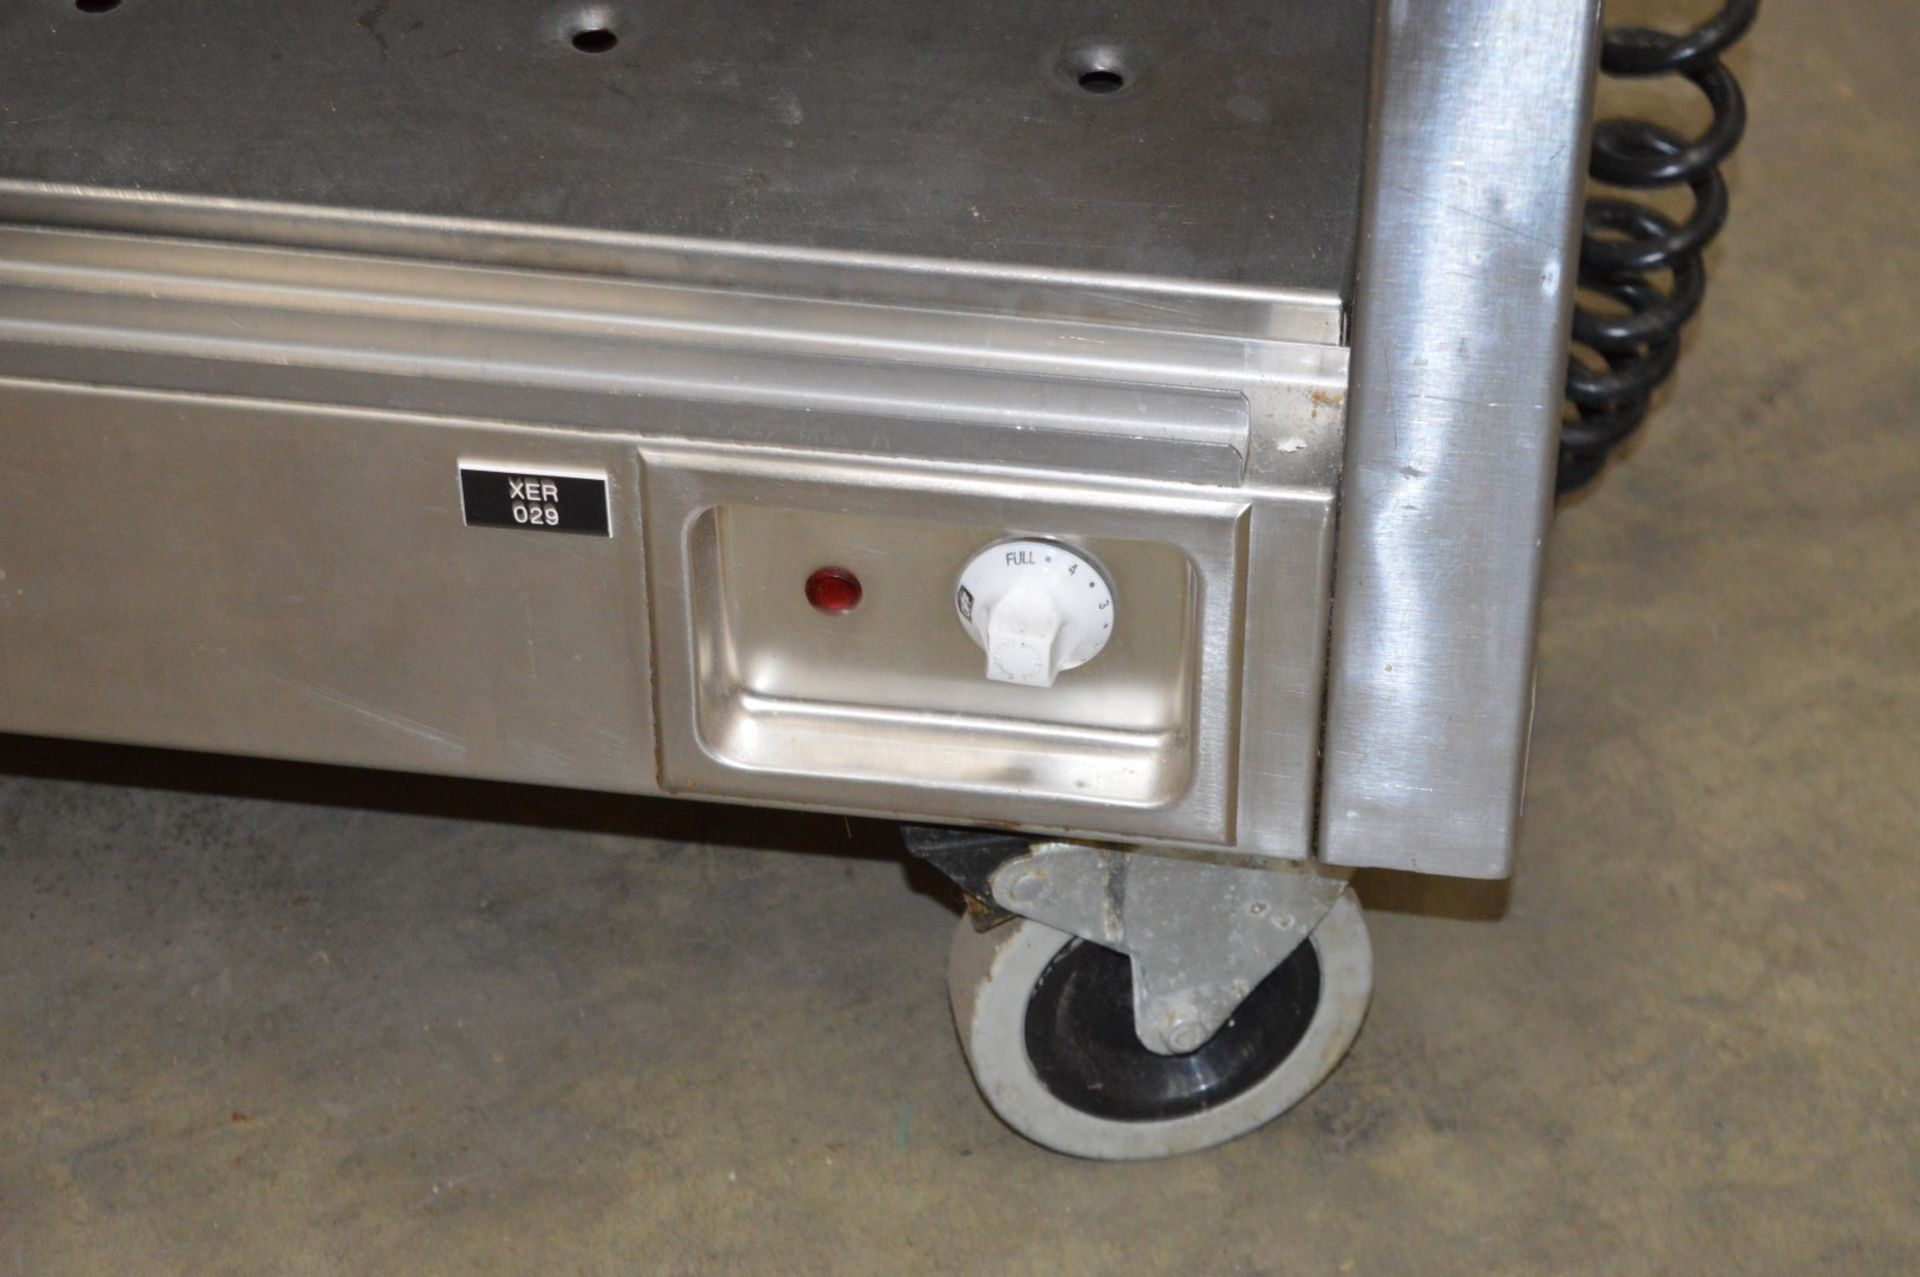 1 x Commercial Catering Storage / Food Warmer Cabinet on Castor Wheels - CL057 - H85 x W90 x D65 cms - Image 3 of 6